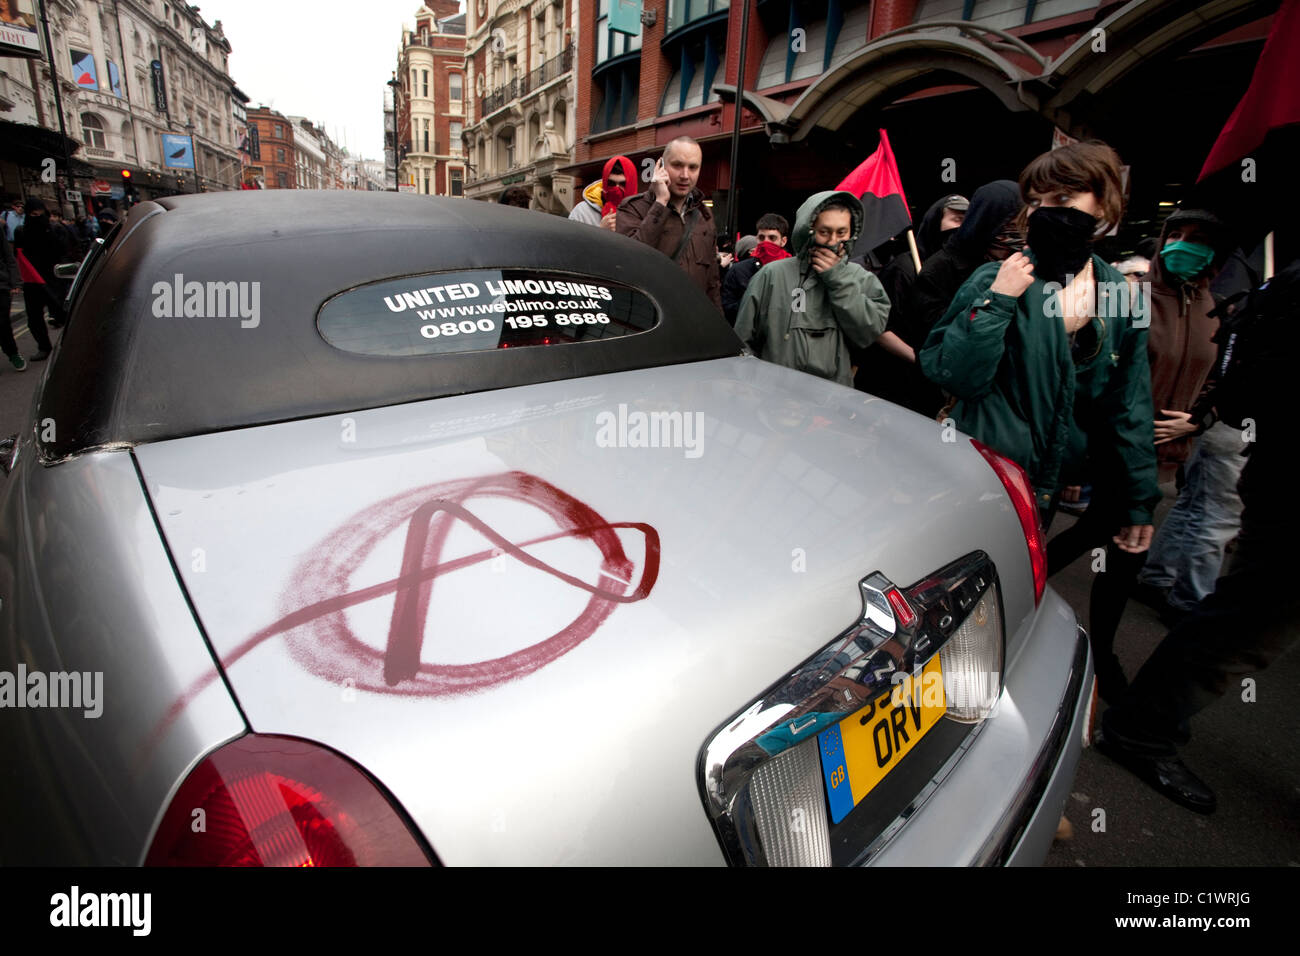 A Limousine on Shaftesbury Avenue daubed with graffiti by anarchists during anti-cuts protests in London. 26/03/2011 Stock Photo